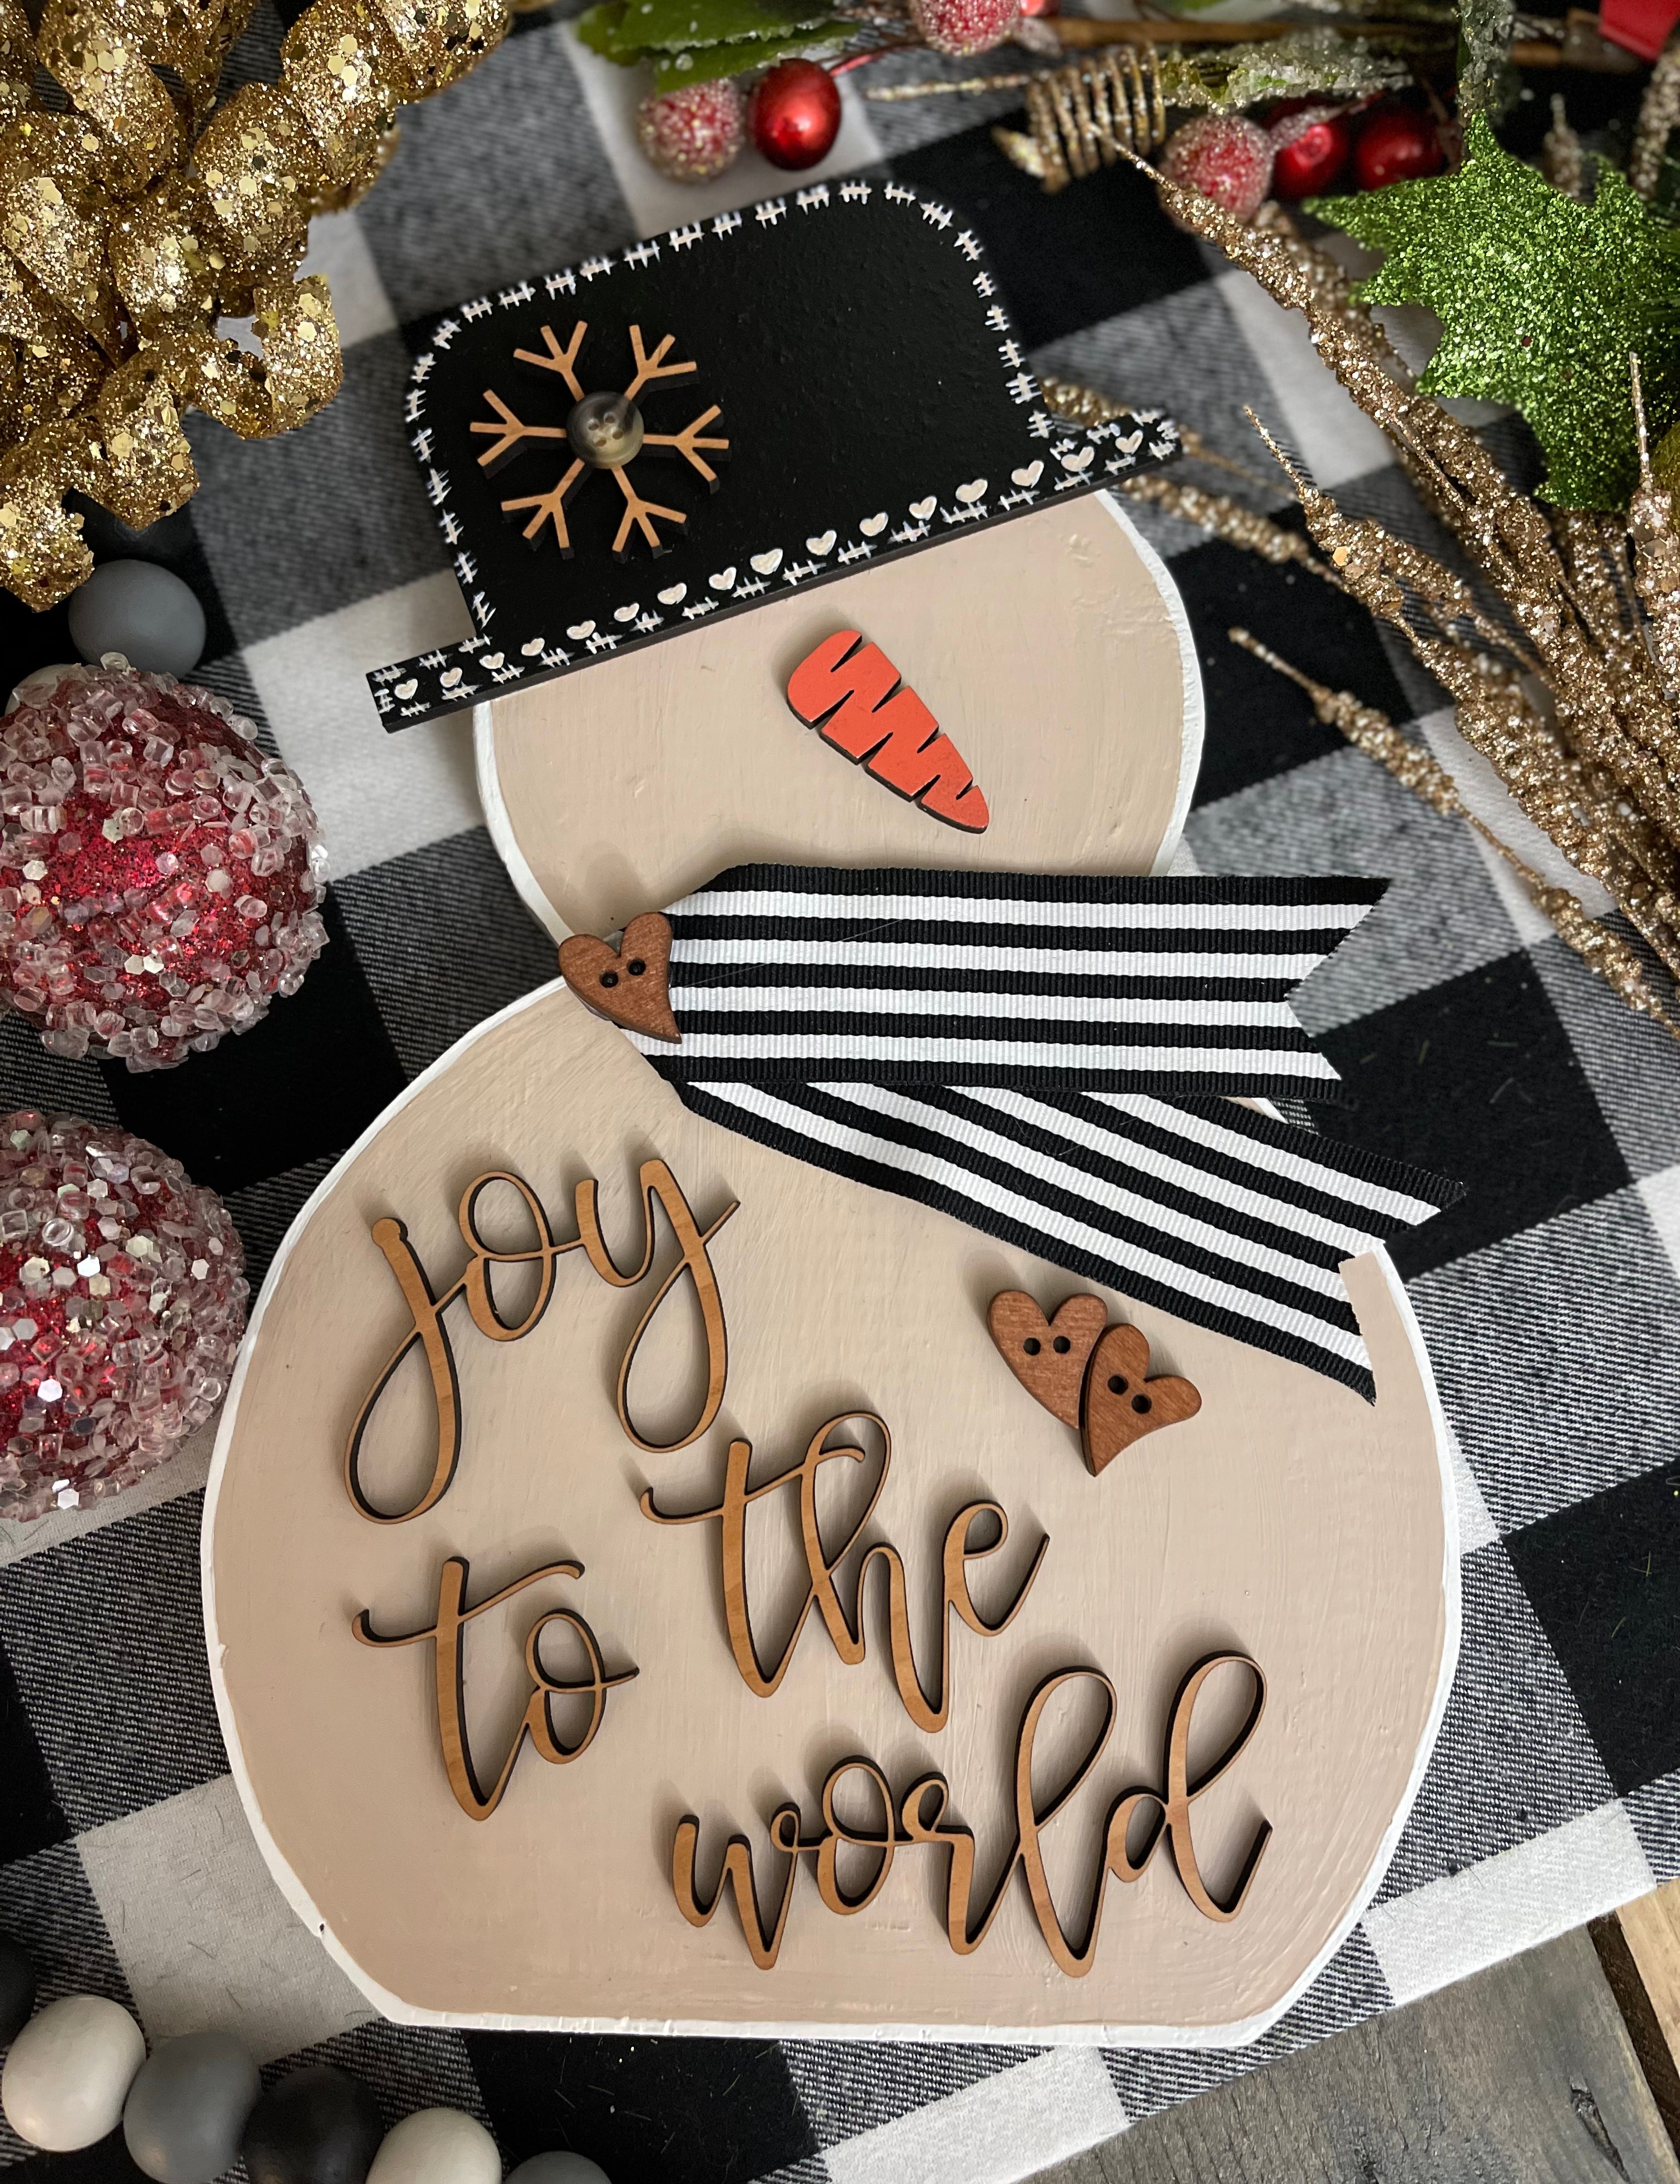 This image shows the large tan snowman that says joy to the world in script.